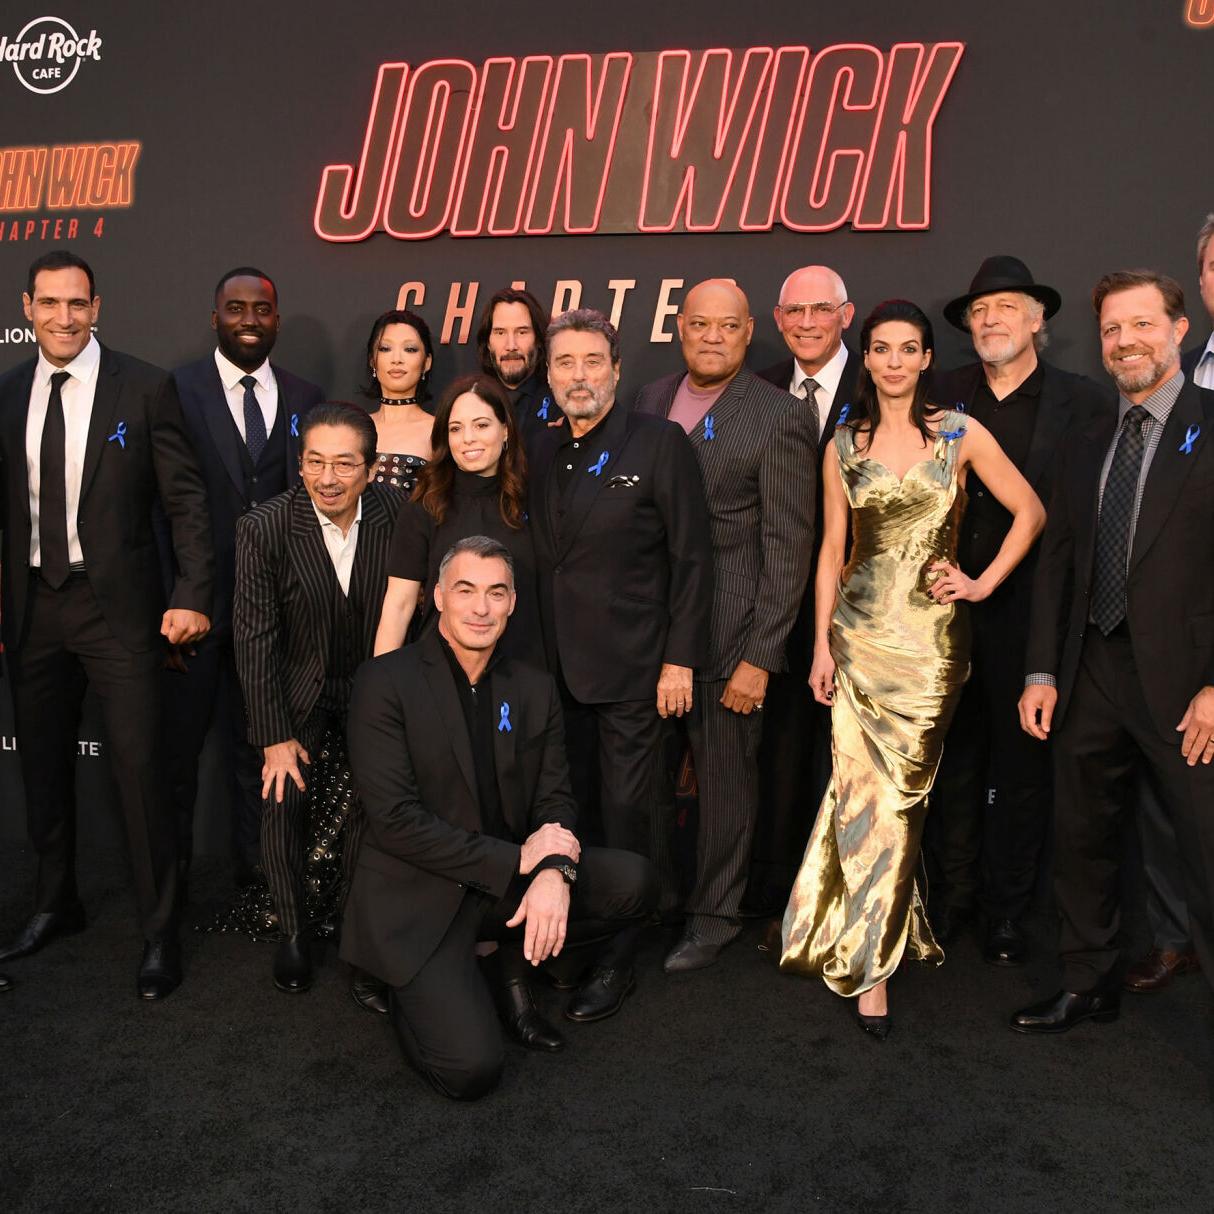 John Wick 4 premiere: Why did Keanu Reeves and the cast wear blue ribbons  to the event?